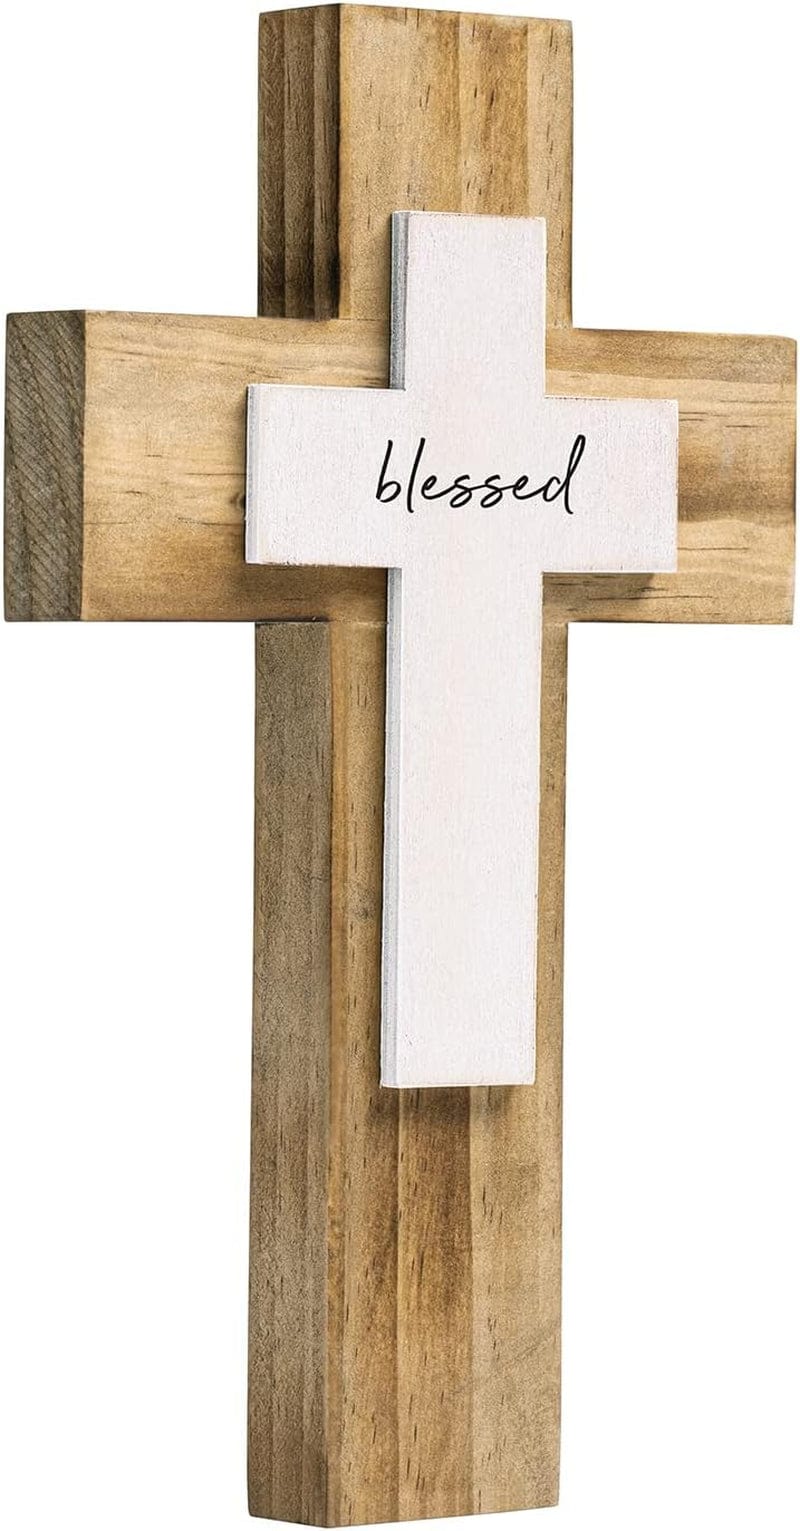 OKSQW Wall Wooden Cross Christians Cross Spiritual Religious Cross Gifts with Hook on Hanging Wall or Table with Blessed for Church Home Room Decoration for Christmas Cross（5 Colors Available… Home & Garden > Decor > Seasonal & Holiday Decorations OKSQW Blessed wood color  